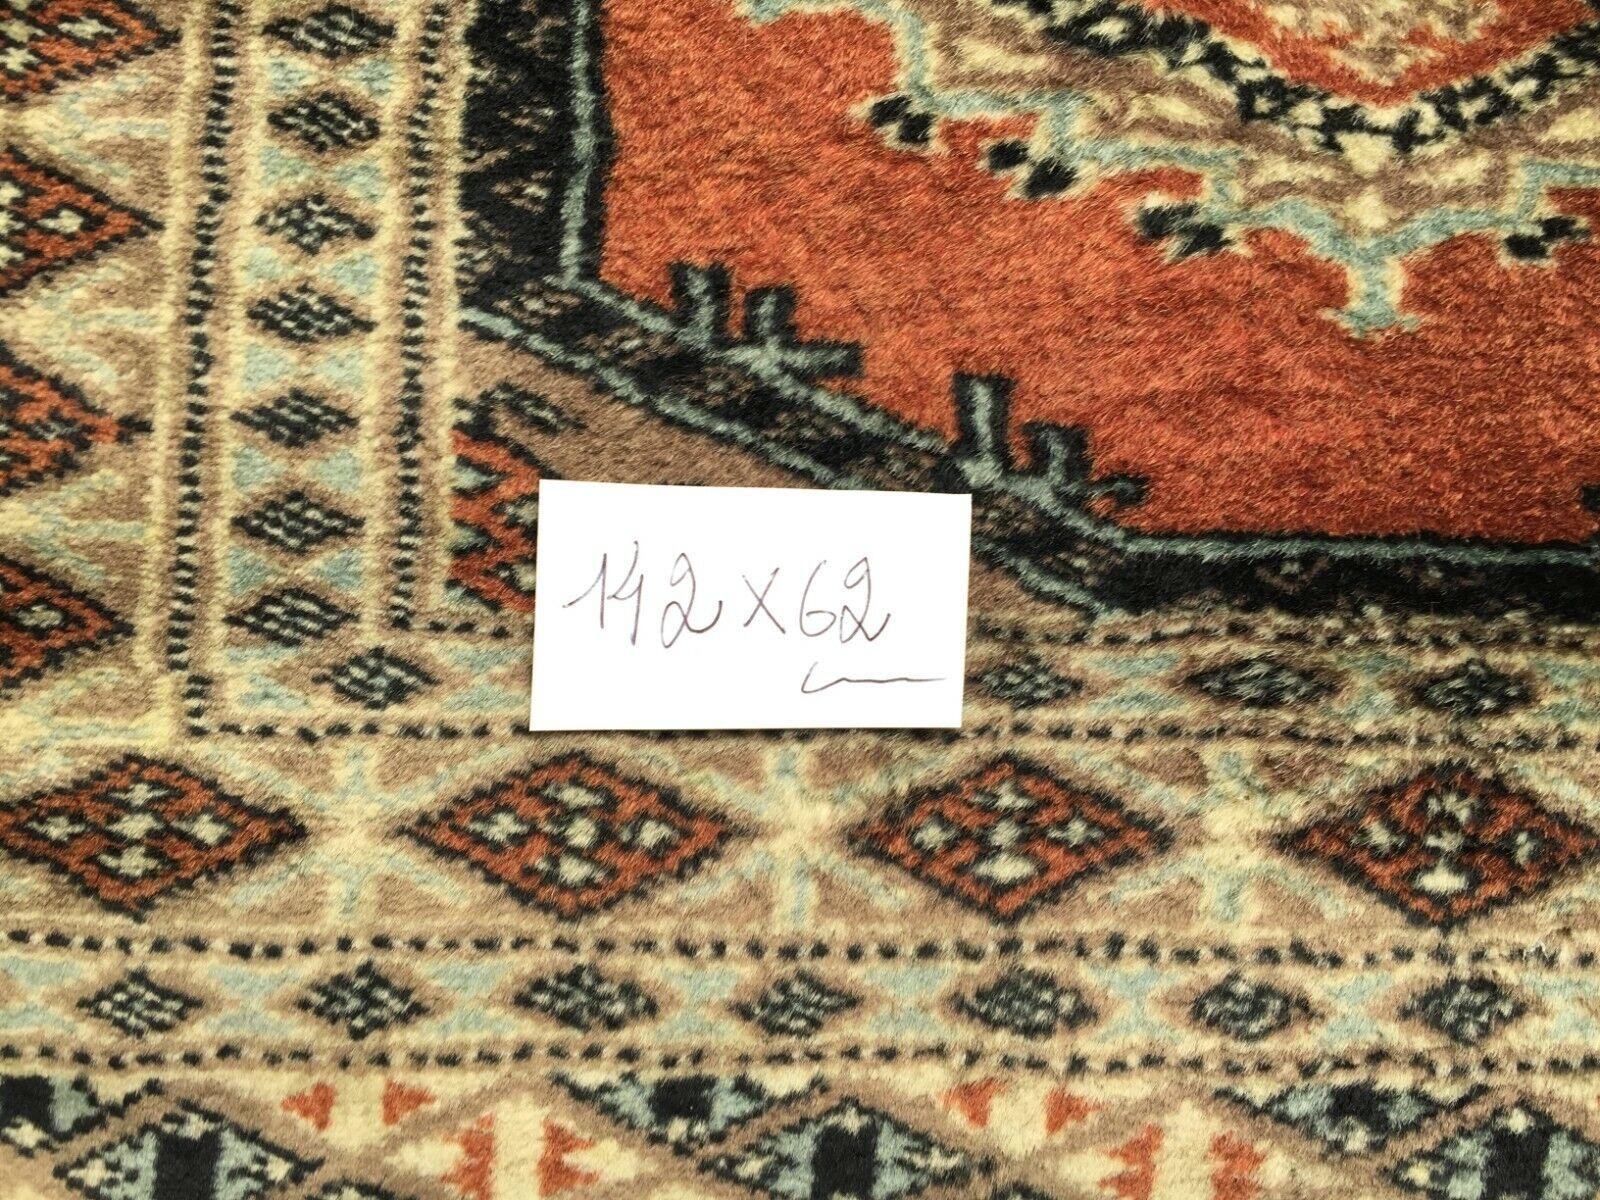 This Handmade Vintage Uzbek Bukhara Rug is a captivating piece crafted in the 1960s. Measuring 2’ x 4.6’ (62cm x 142cm), it boasts intricate craftsmanship and vibrant colors. Let’s explore its features based on the image:

Colors and Patterns:
The